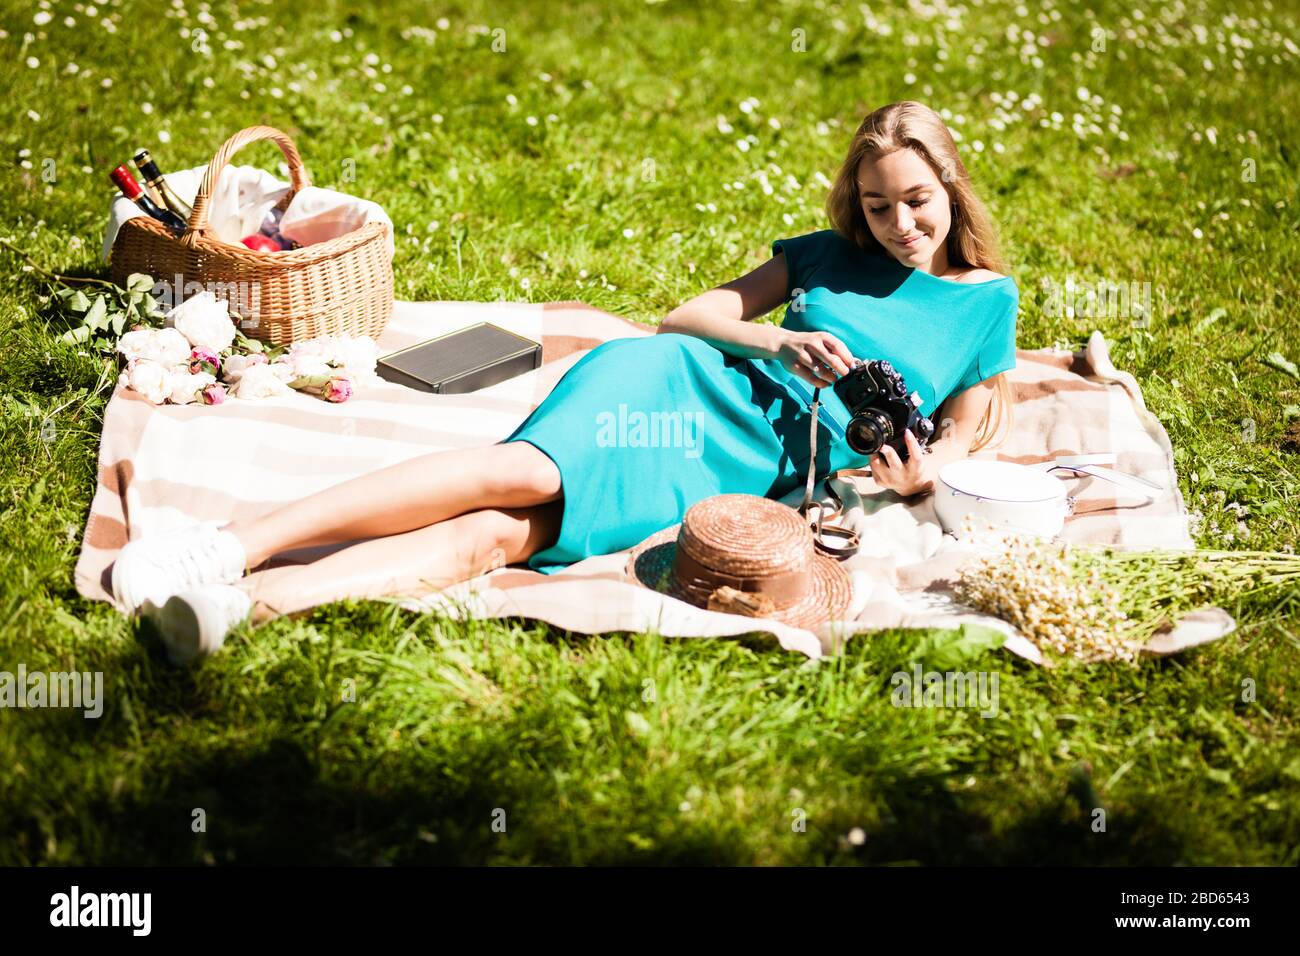 Portrait of happy young woman having rest on picnic in park Stock Photo